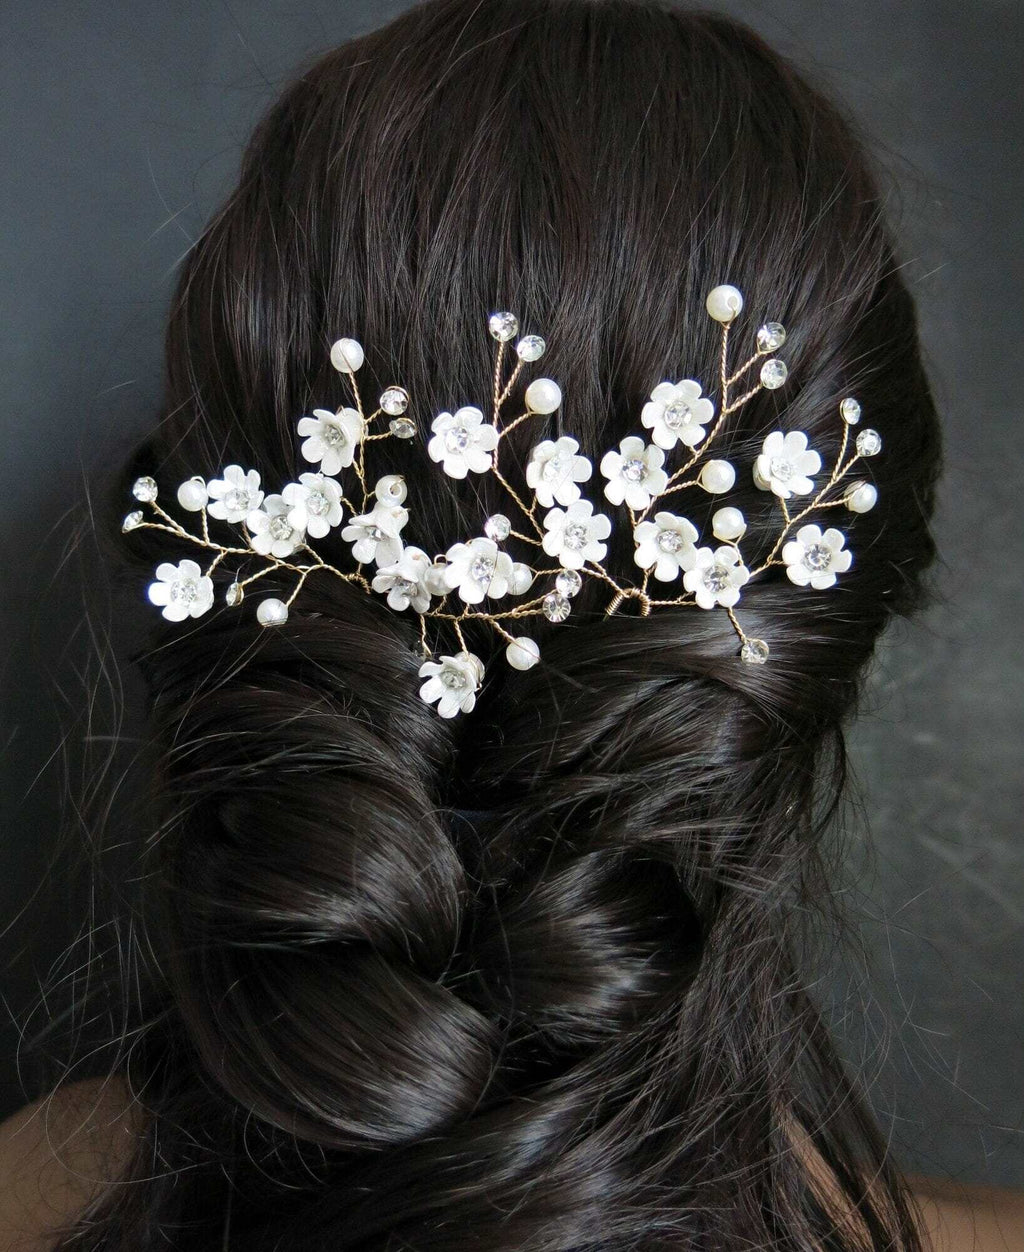 Abalone Like Flowers Large Gold Hairpin, Bridal Party Floral Hairpiece, Wedding Small Ivory Flower Hair Pin, Branch Wire Hairpin - KaleaBoutique.com